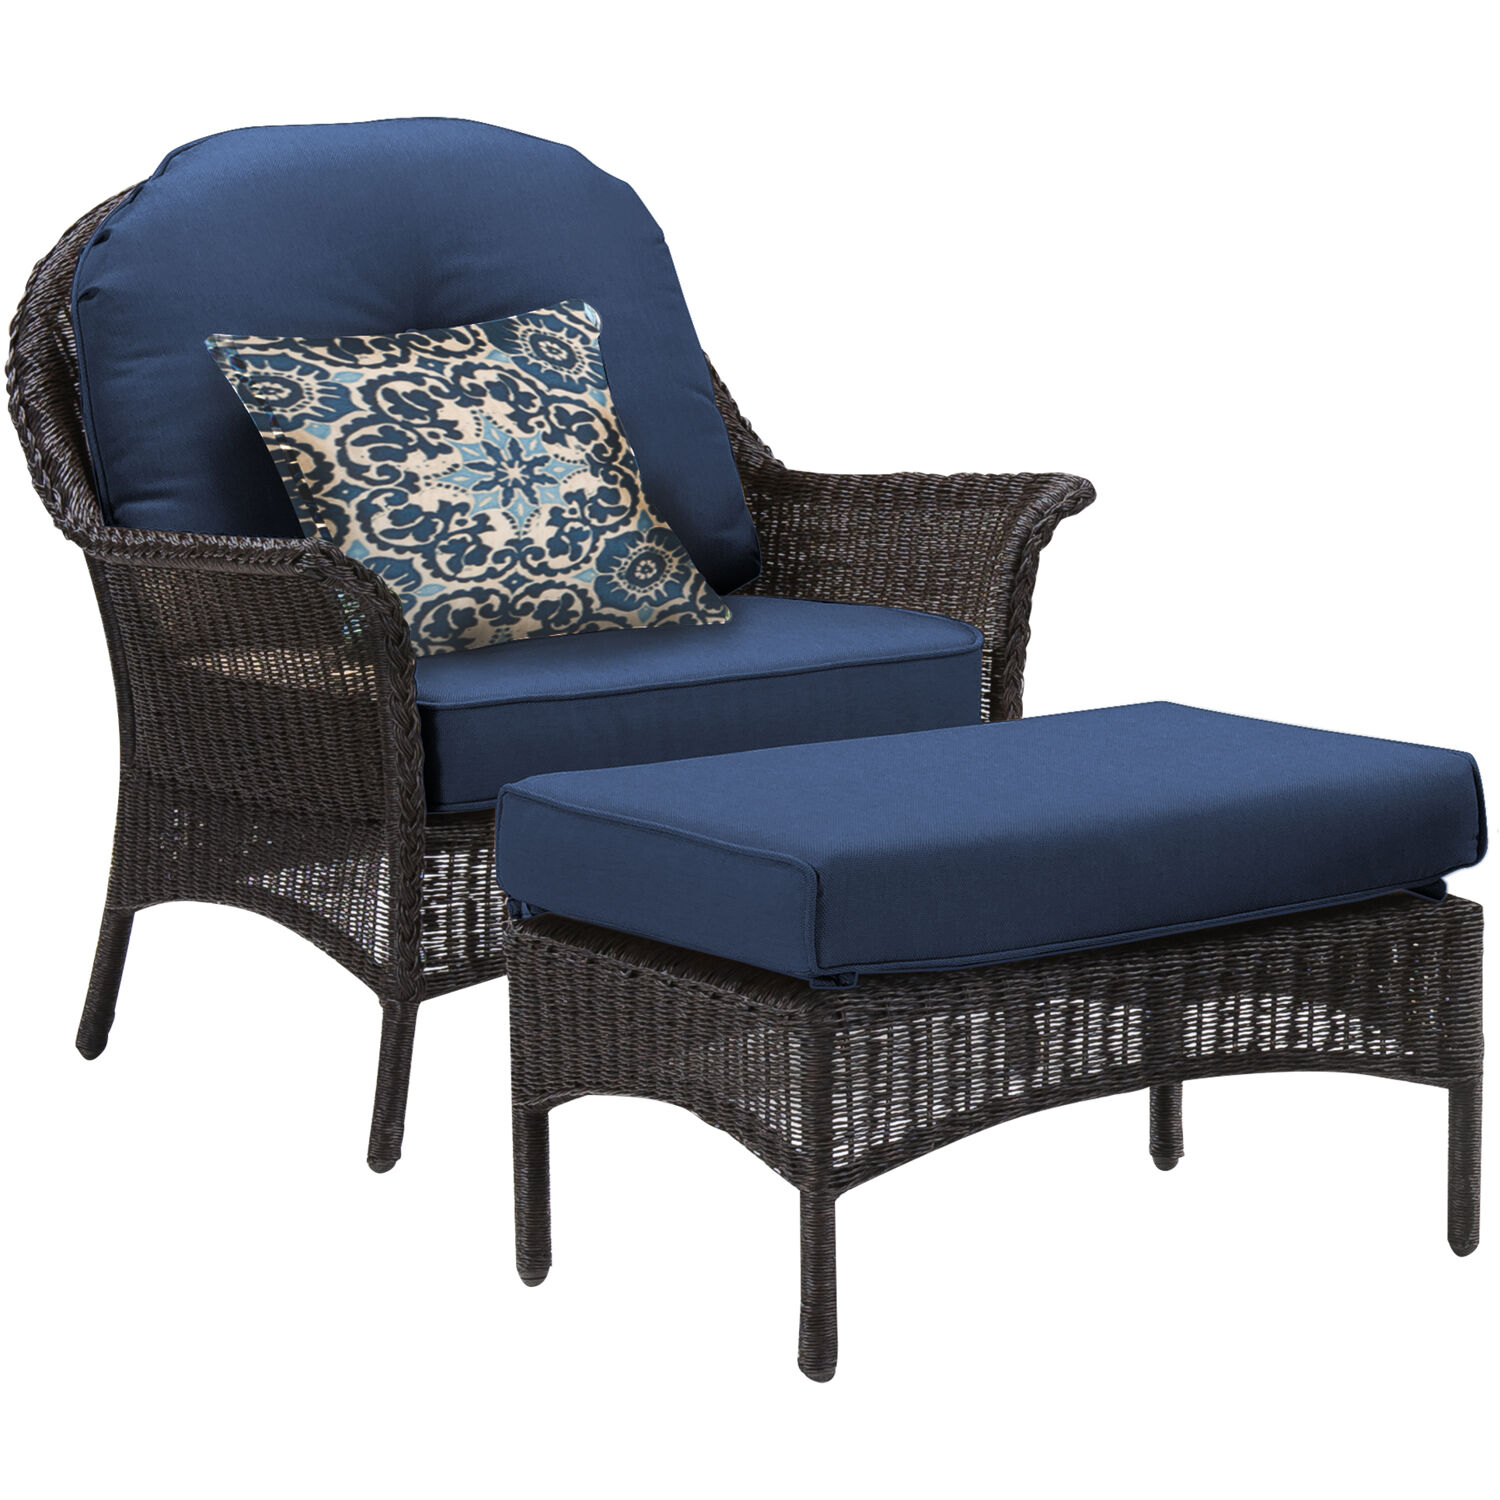 Hanover Sun Porch 6-Pc. Resin Lounge Set w/ Handwoven Loveseat, 2 Armchairs, 2 Ottomans, Coffee Table and Plush Navy Blue Cushions - image 5 of 14